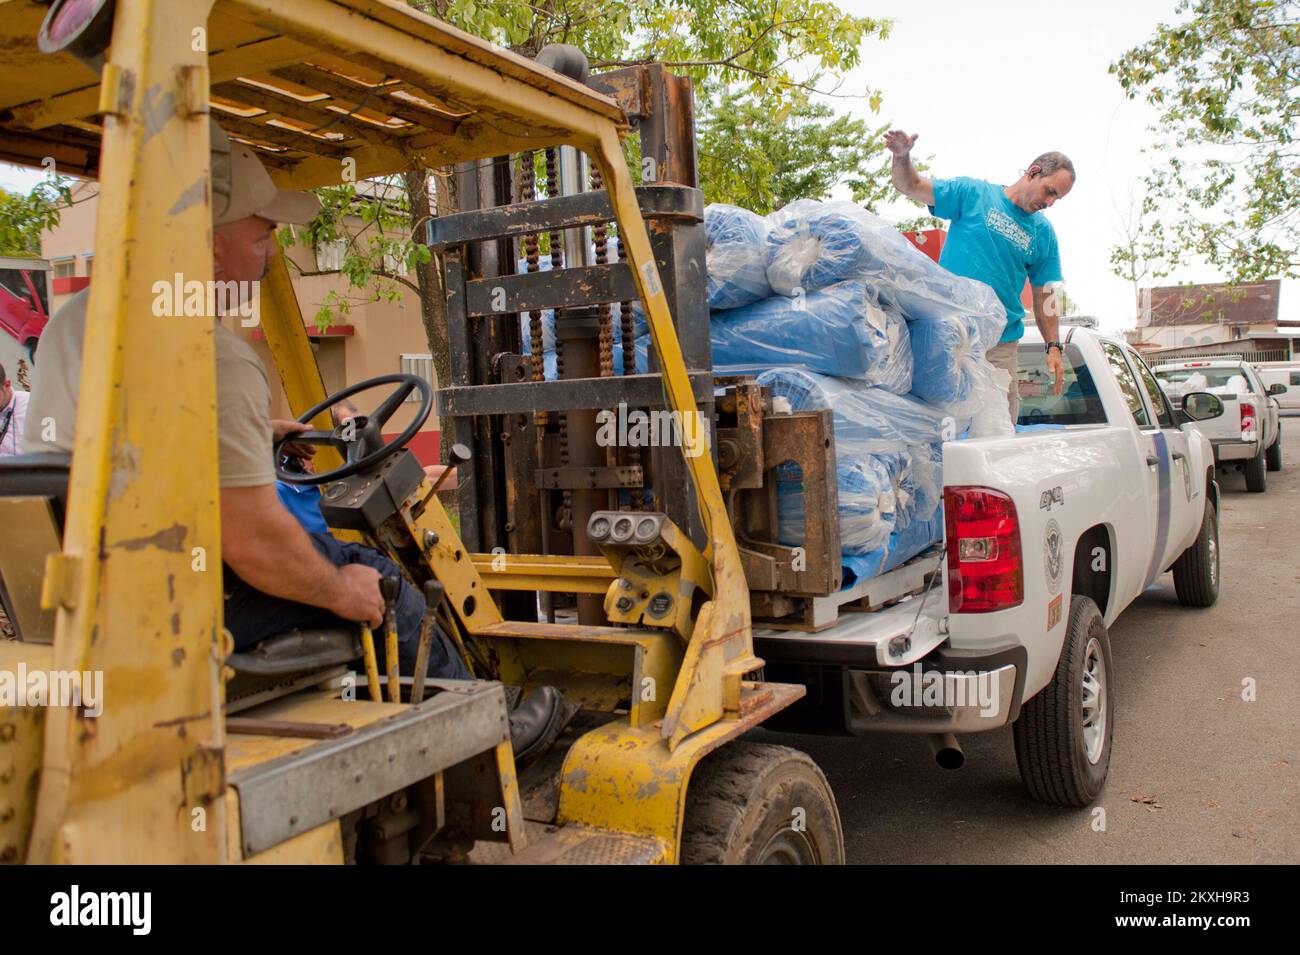 FEMa and PREMA distribute blue tarts. Puerto Rico Hurricane Irene. Photographs Relating to Disasters and Emergency Management Programs, Activities, and Officials Stock Photo